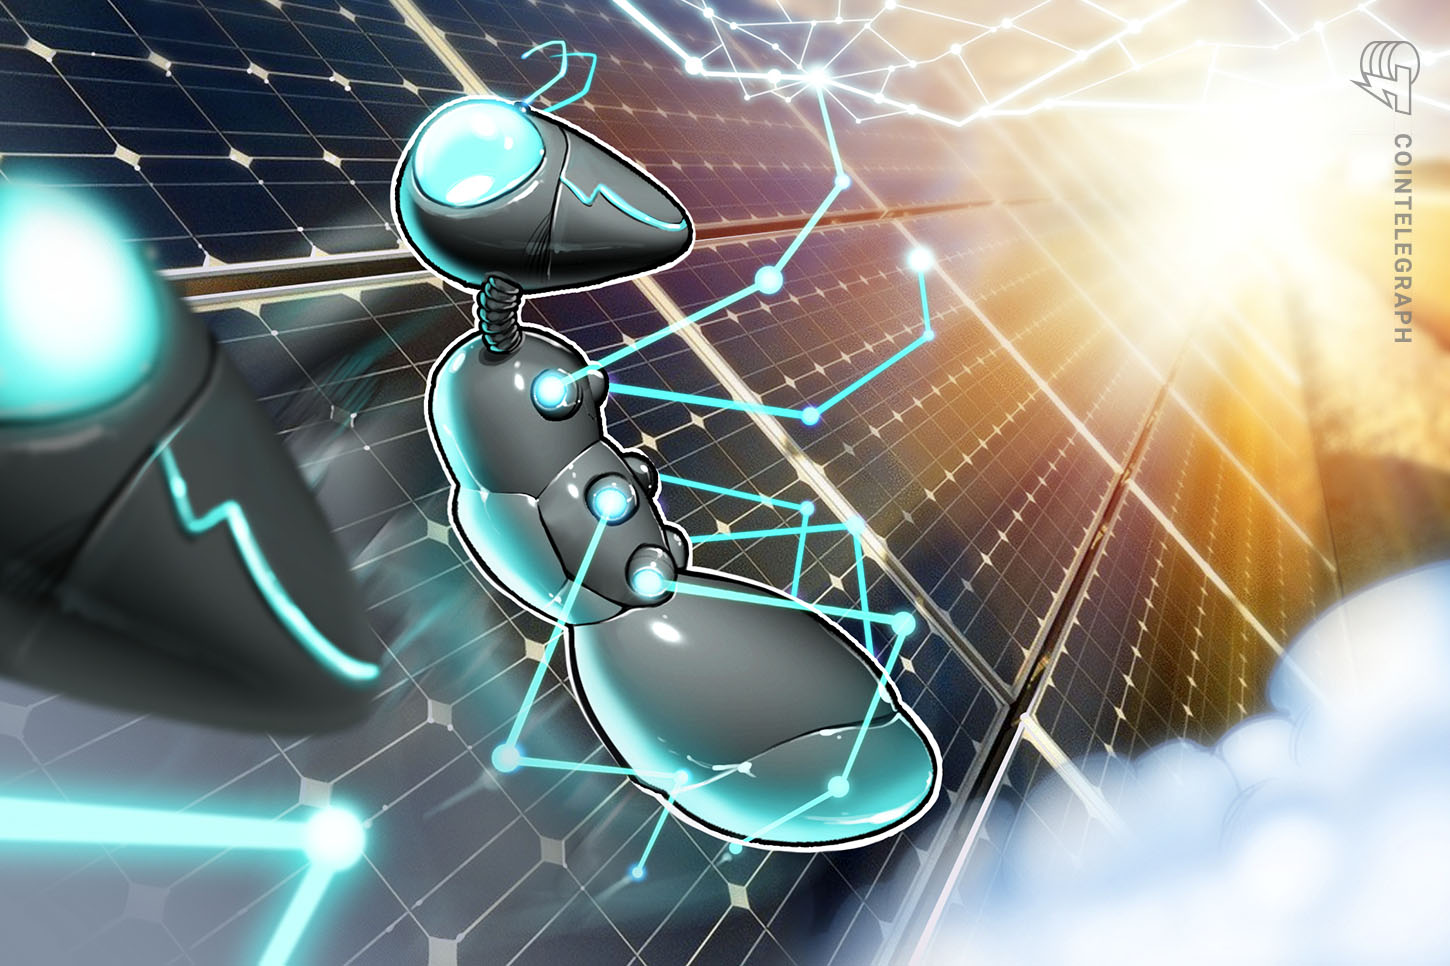 South African Solar Energy Blockchain Startup Raises $3 Million, Plans to Expand Across Continent